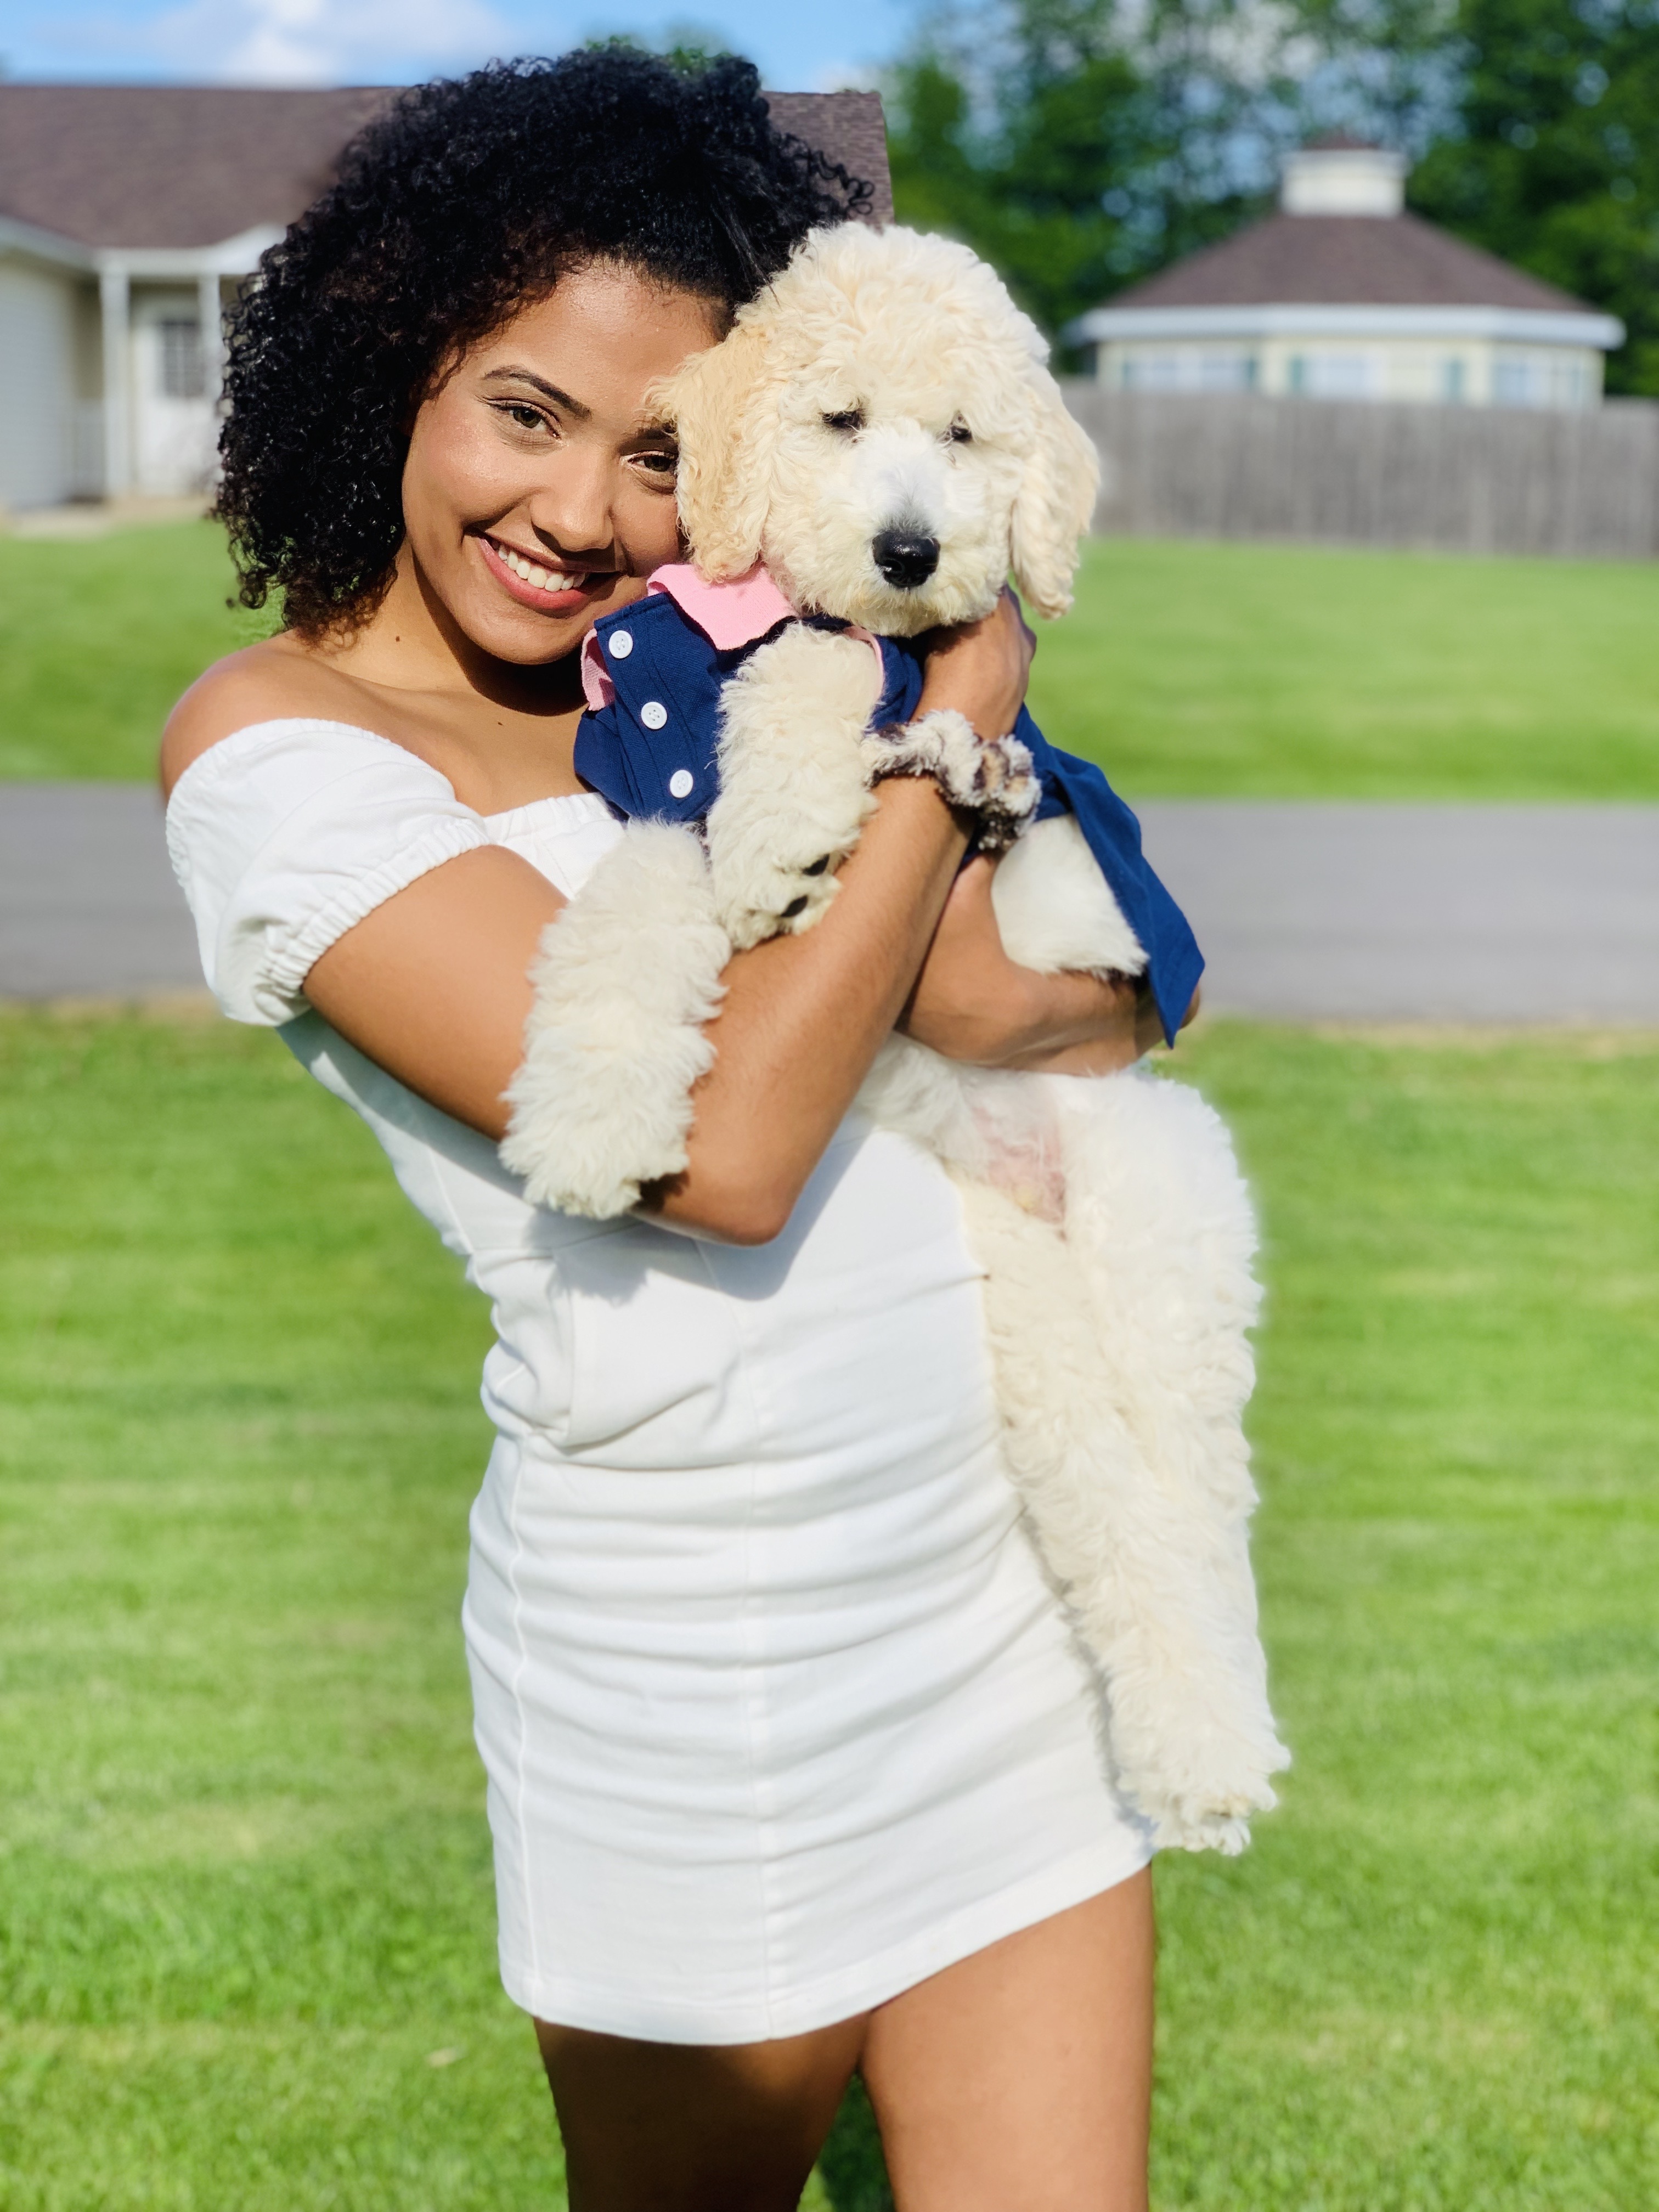 African American woman in a white dress holding a white puppy, which is wearing a blue and pink shirt.